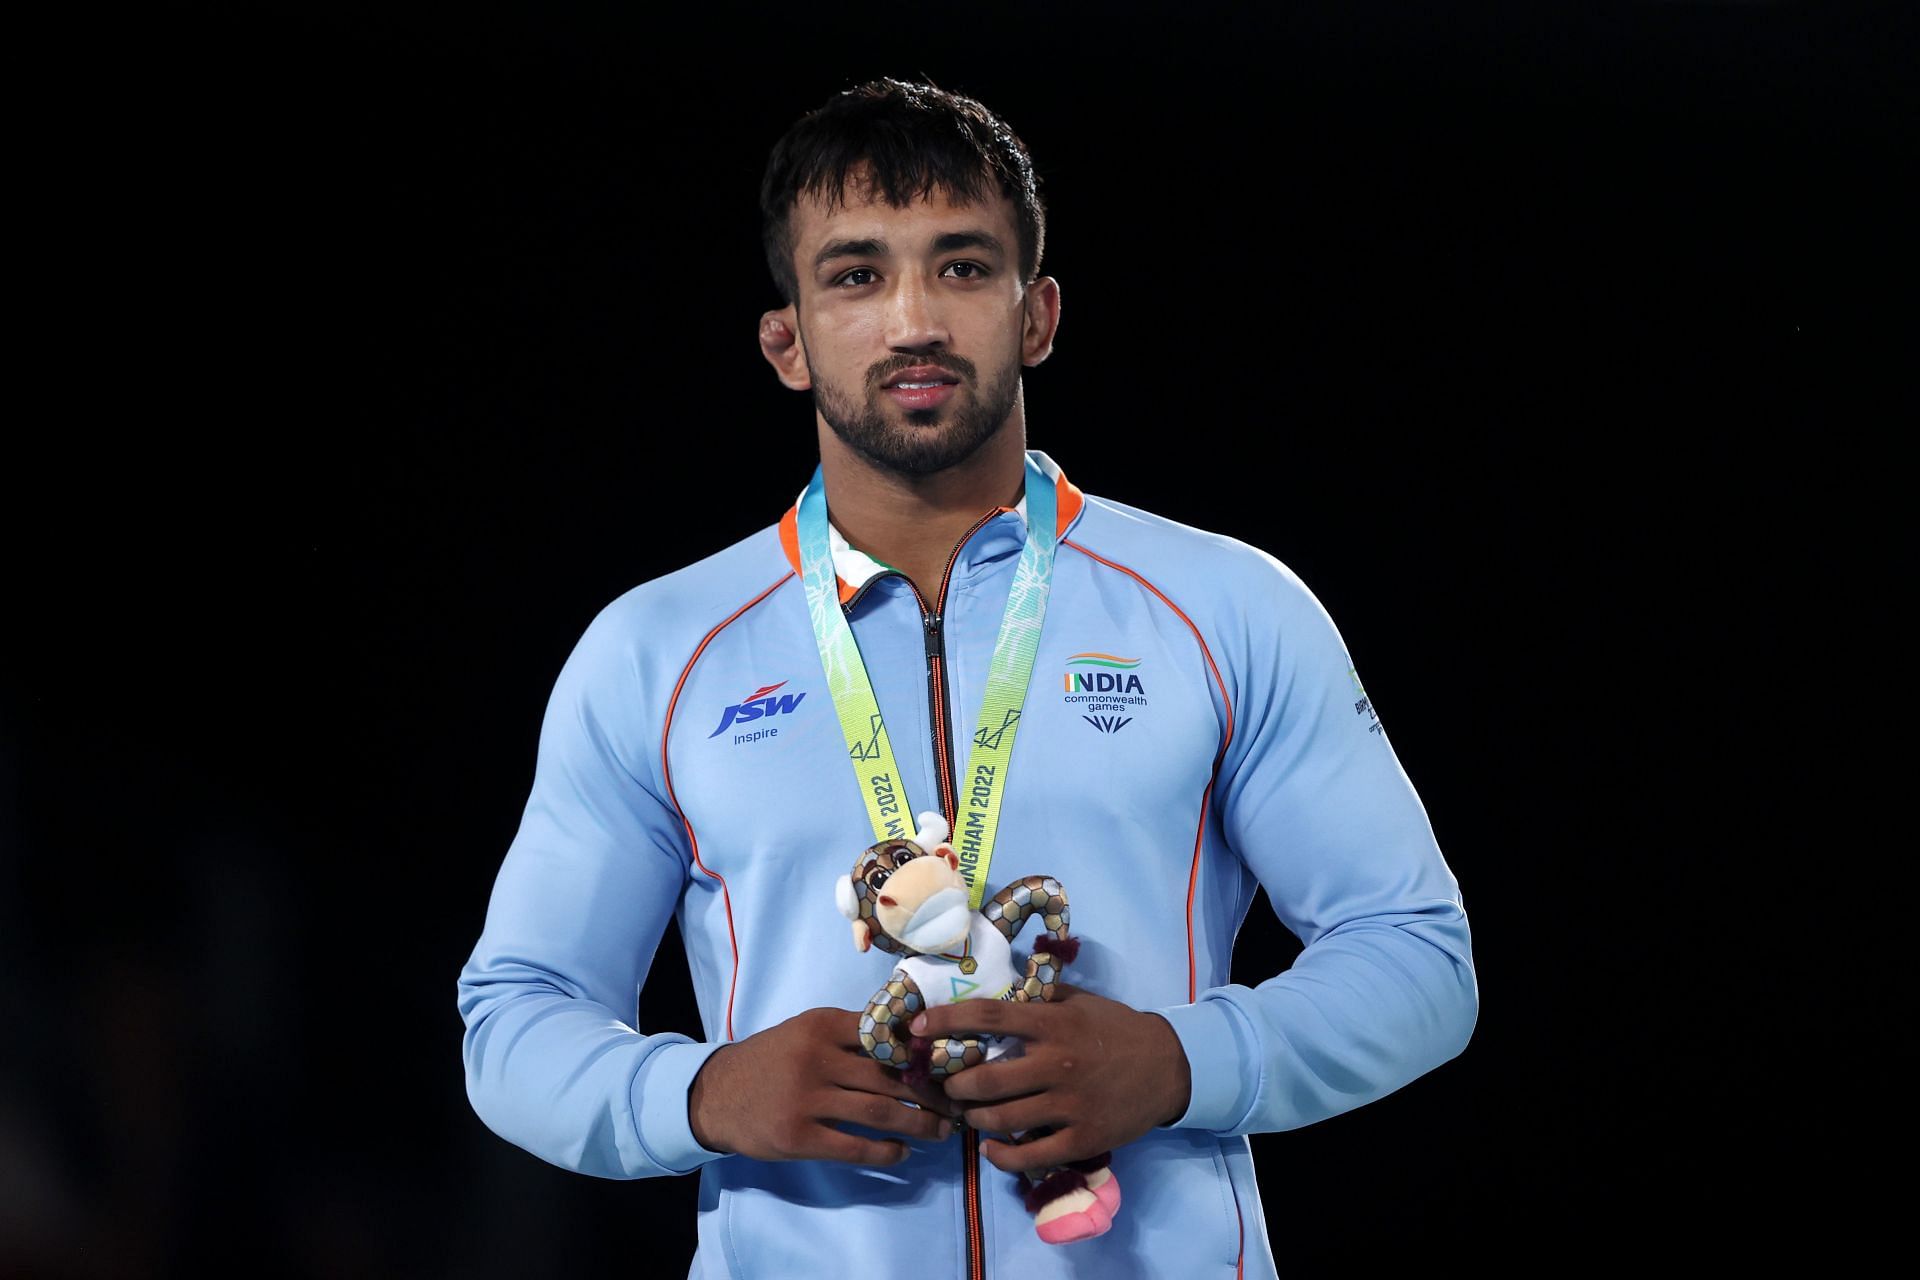 Naveen Gold Medal - Commonwealth Games 2022